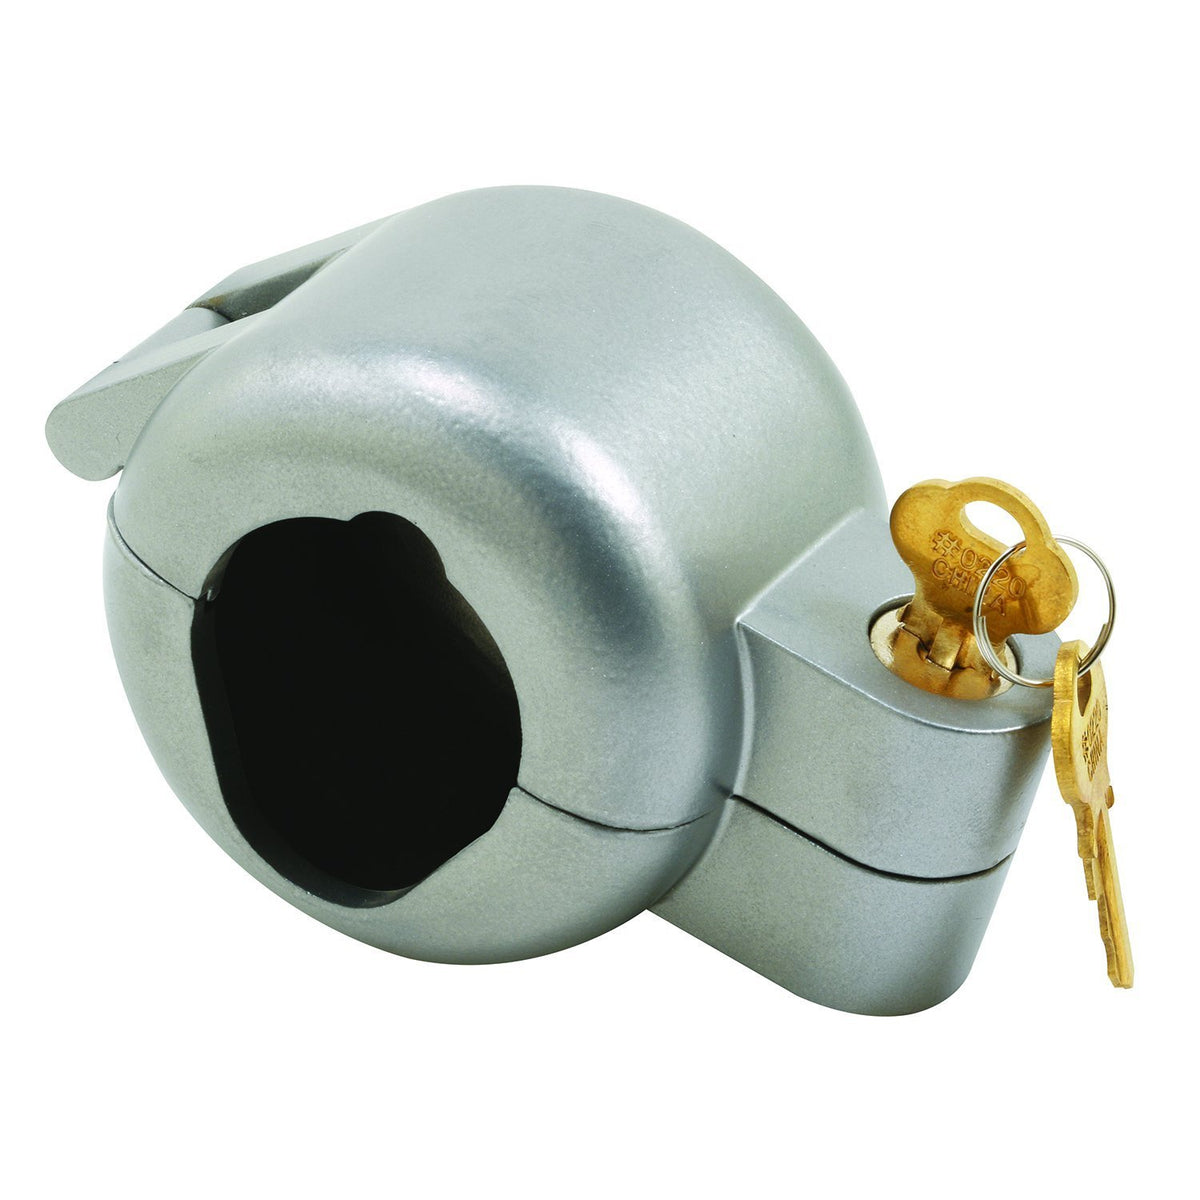 Buy prime-line s 4180 door knob lock-out device - Online store for general hardware, safety lockout / hasps in USA, on sale, low price, discount deals, coupon code